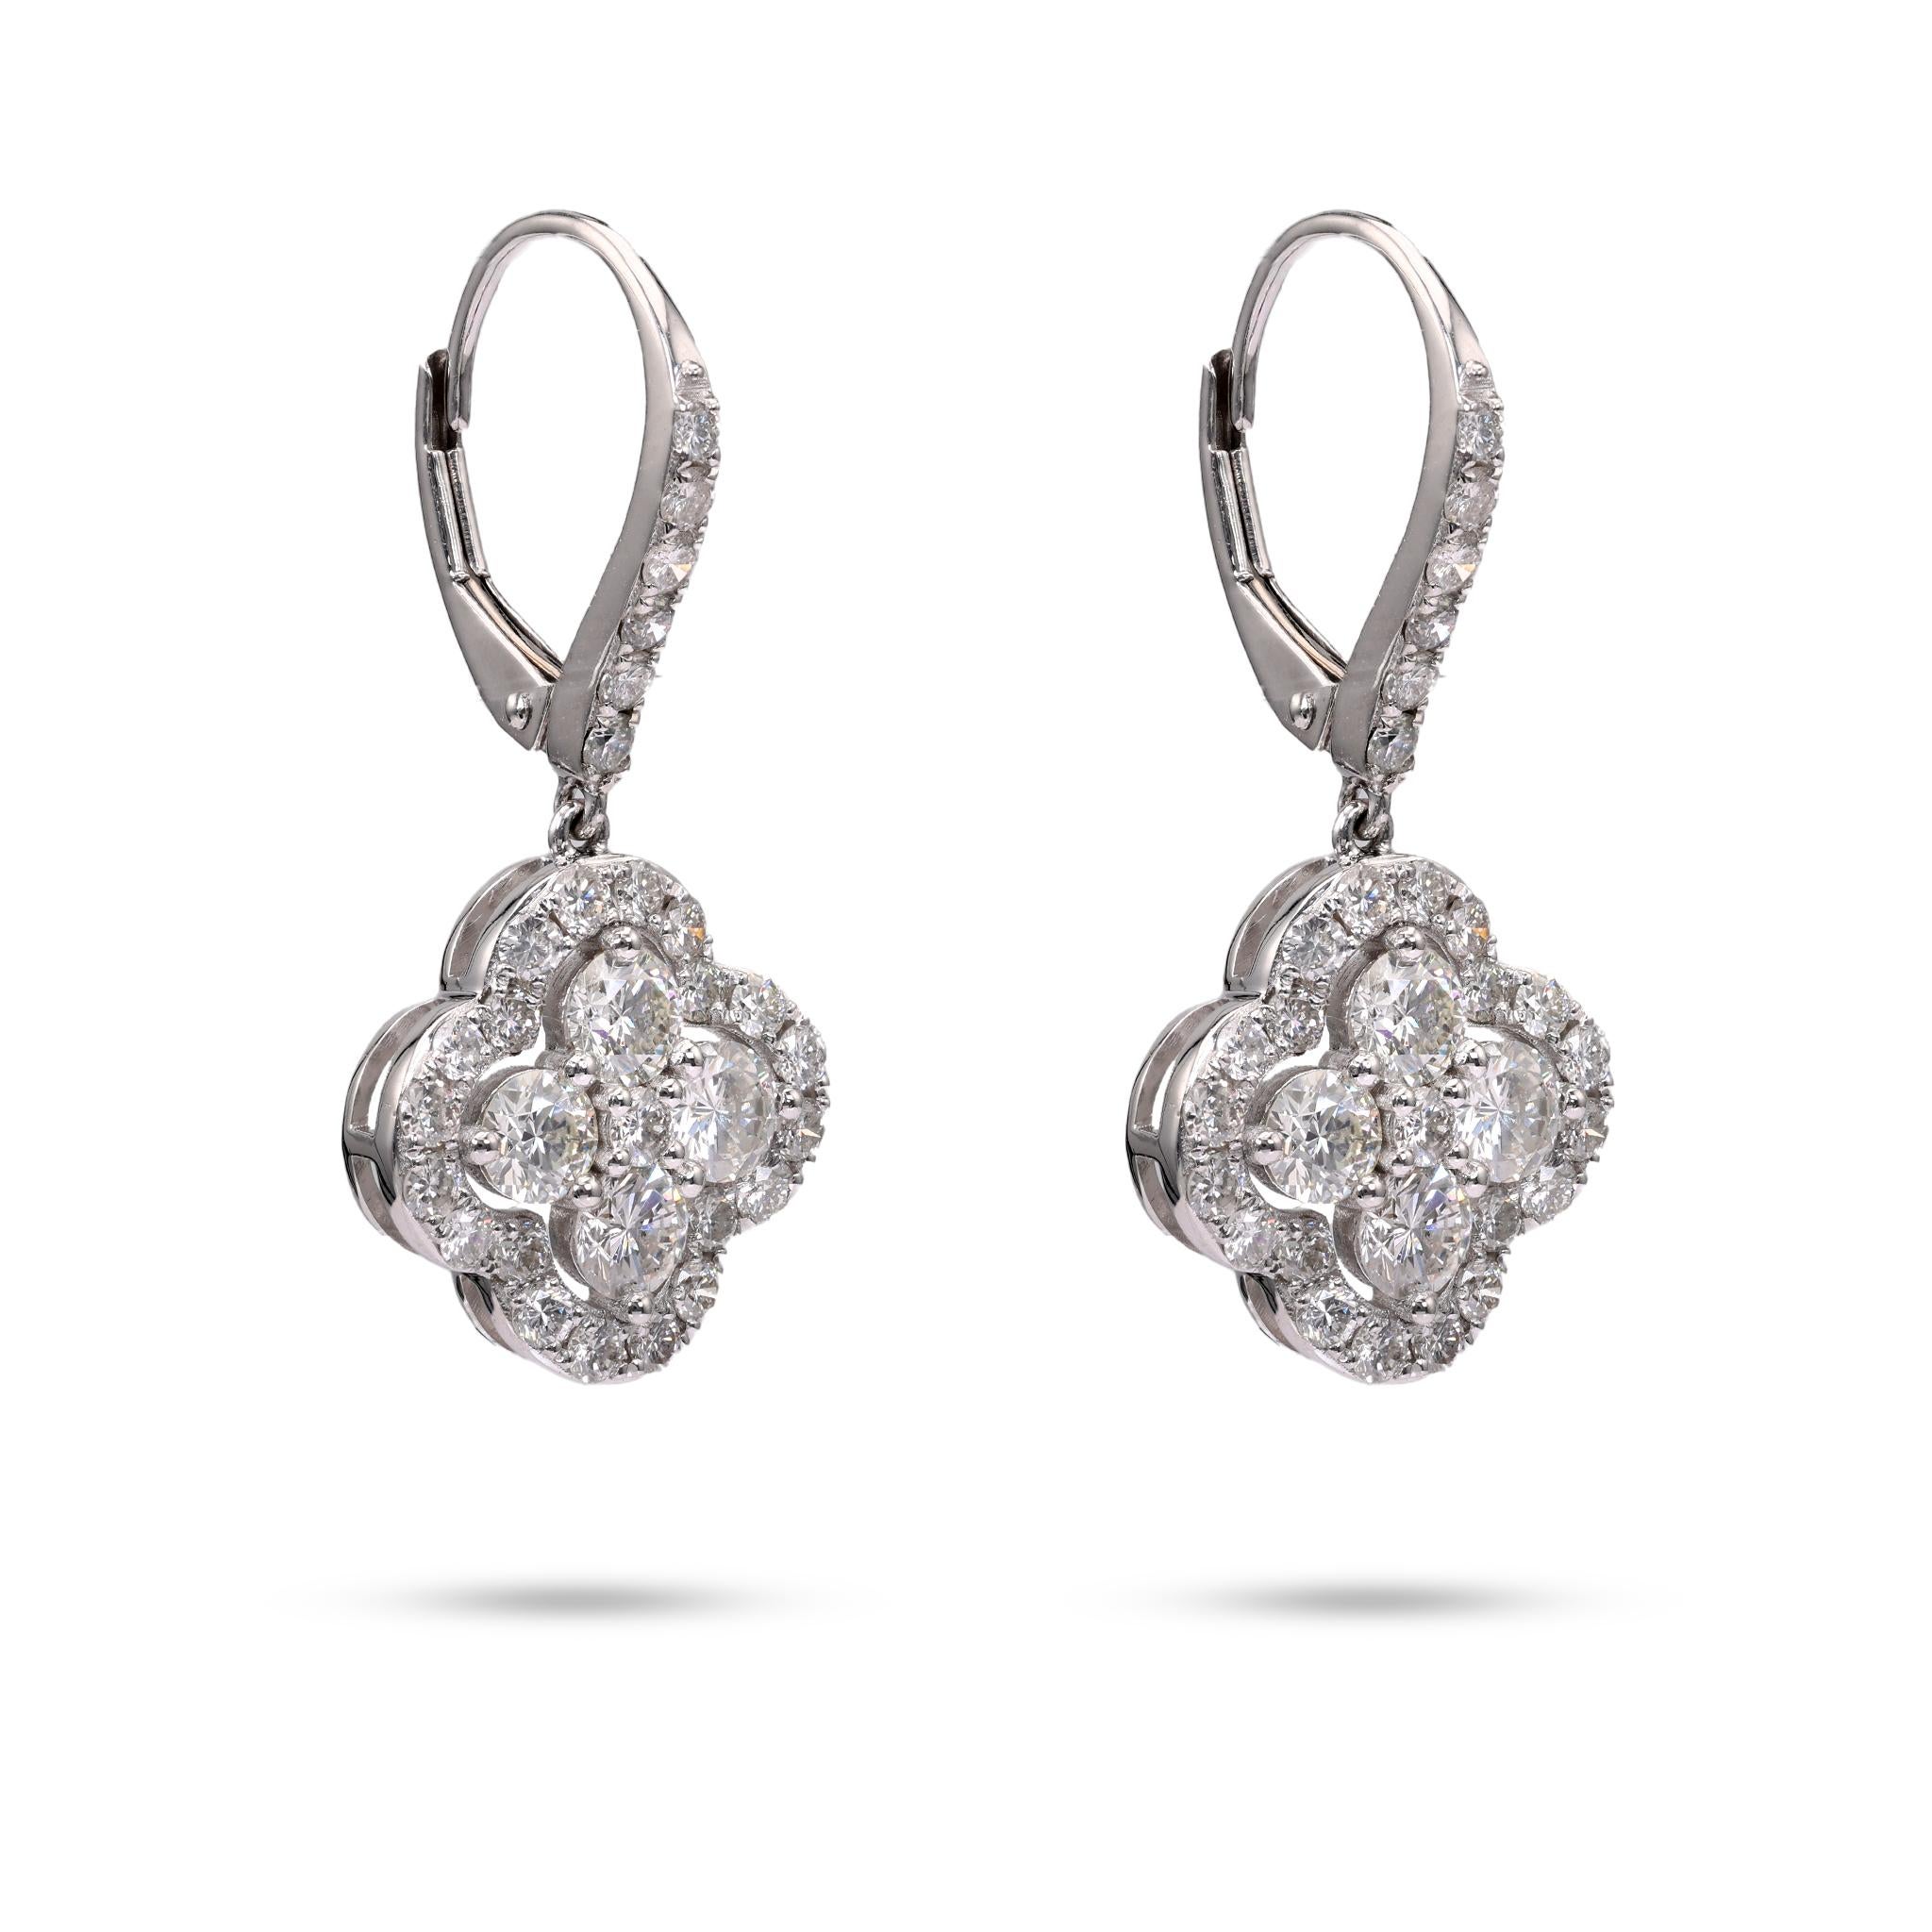 2.55 Carat Total Weight Diamond Platinum Earrings In Excellent Condition For Sale In Beverly Hills, CA